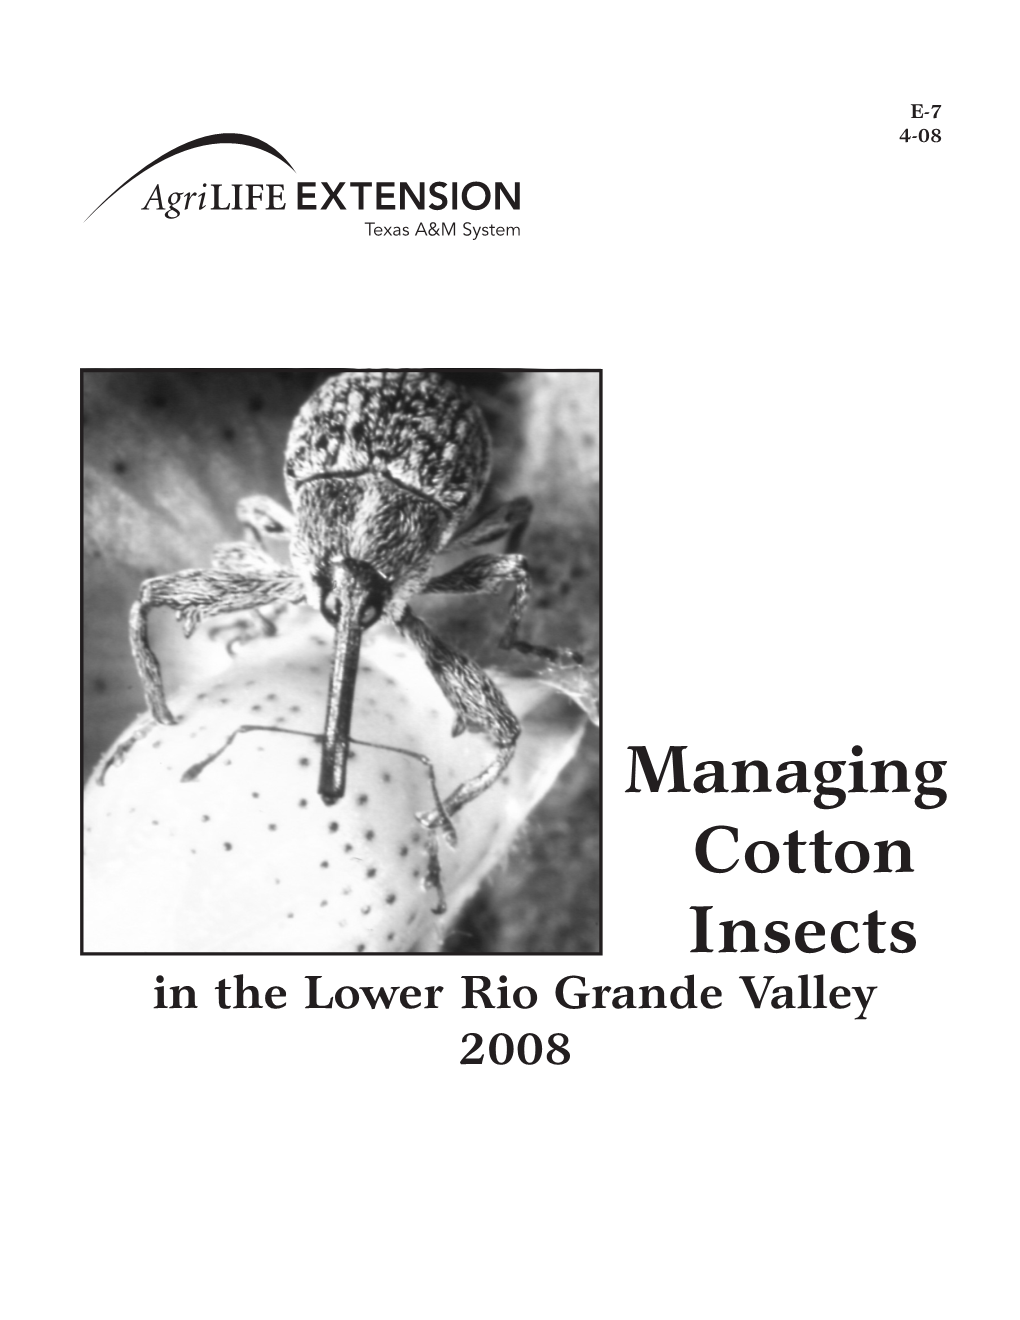 Managing Cotton Insects in the Lower Rio Grande Valley 2008 Contents Page IPM Principles